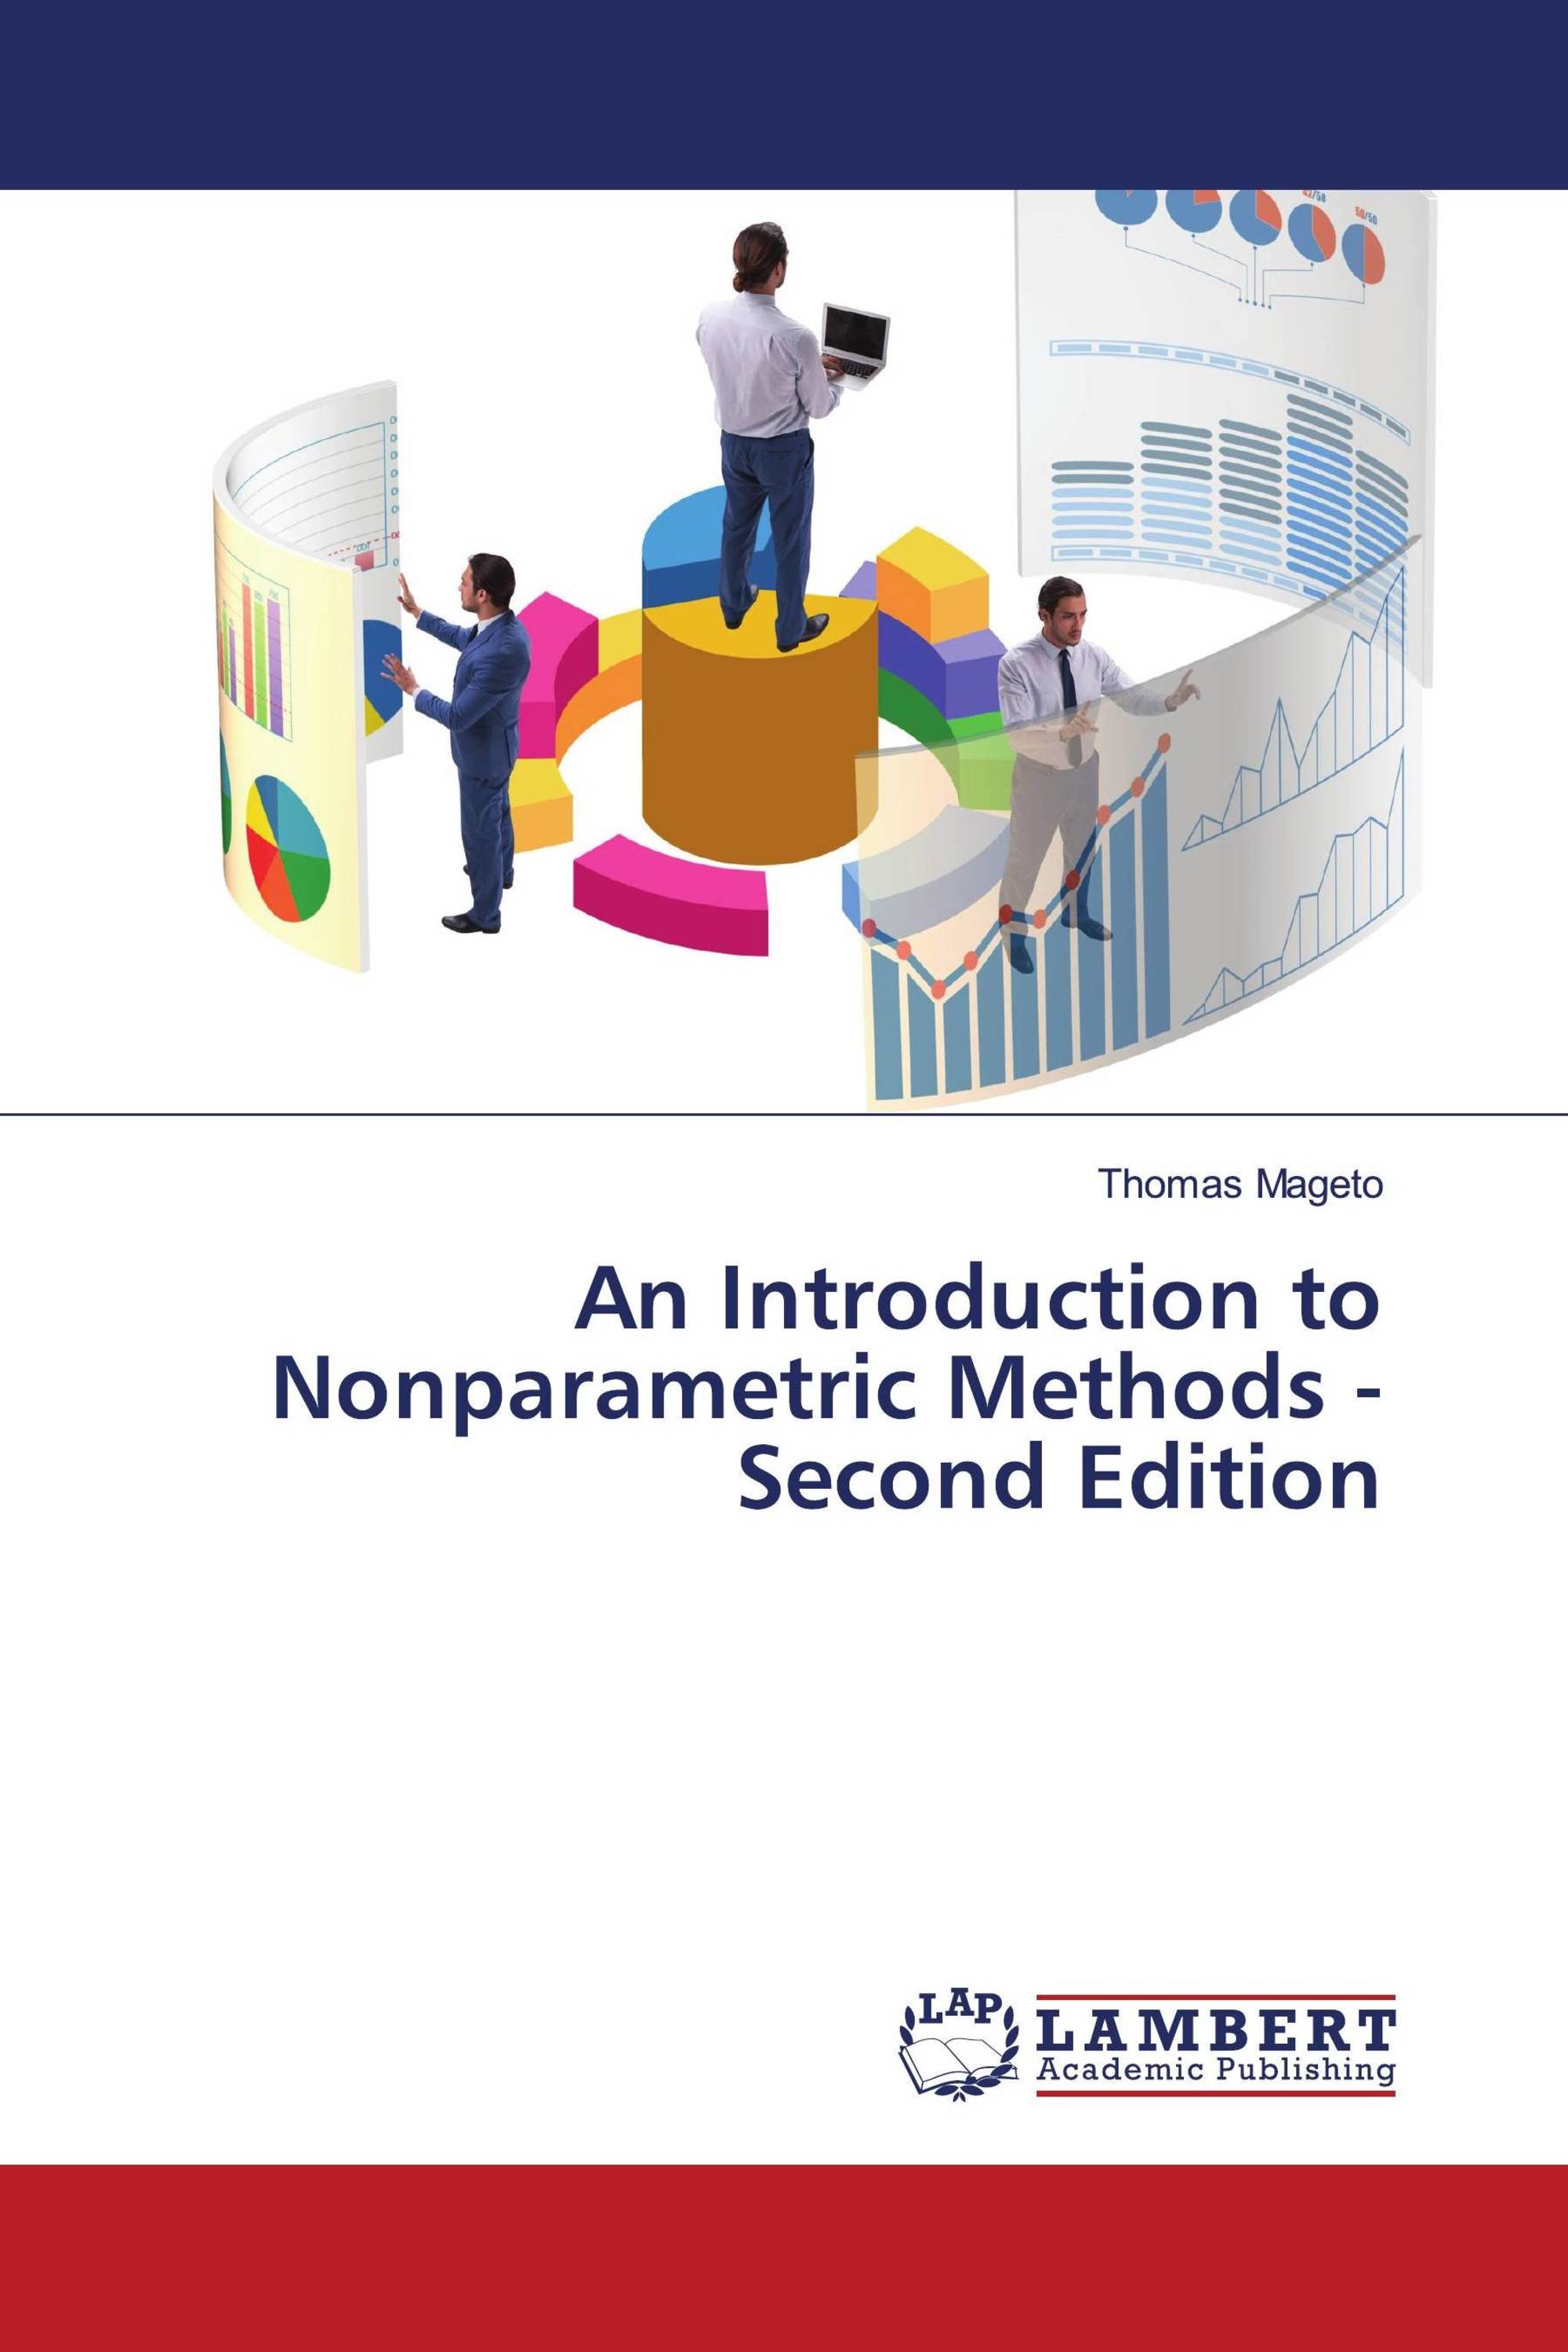 An Introduction to Nonparametric Methods - Second Edition